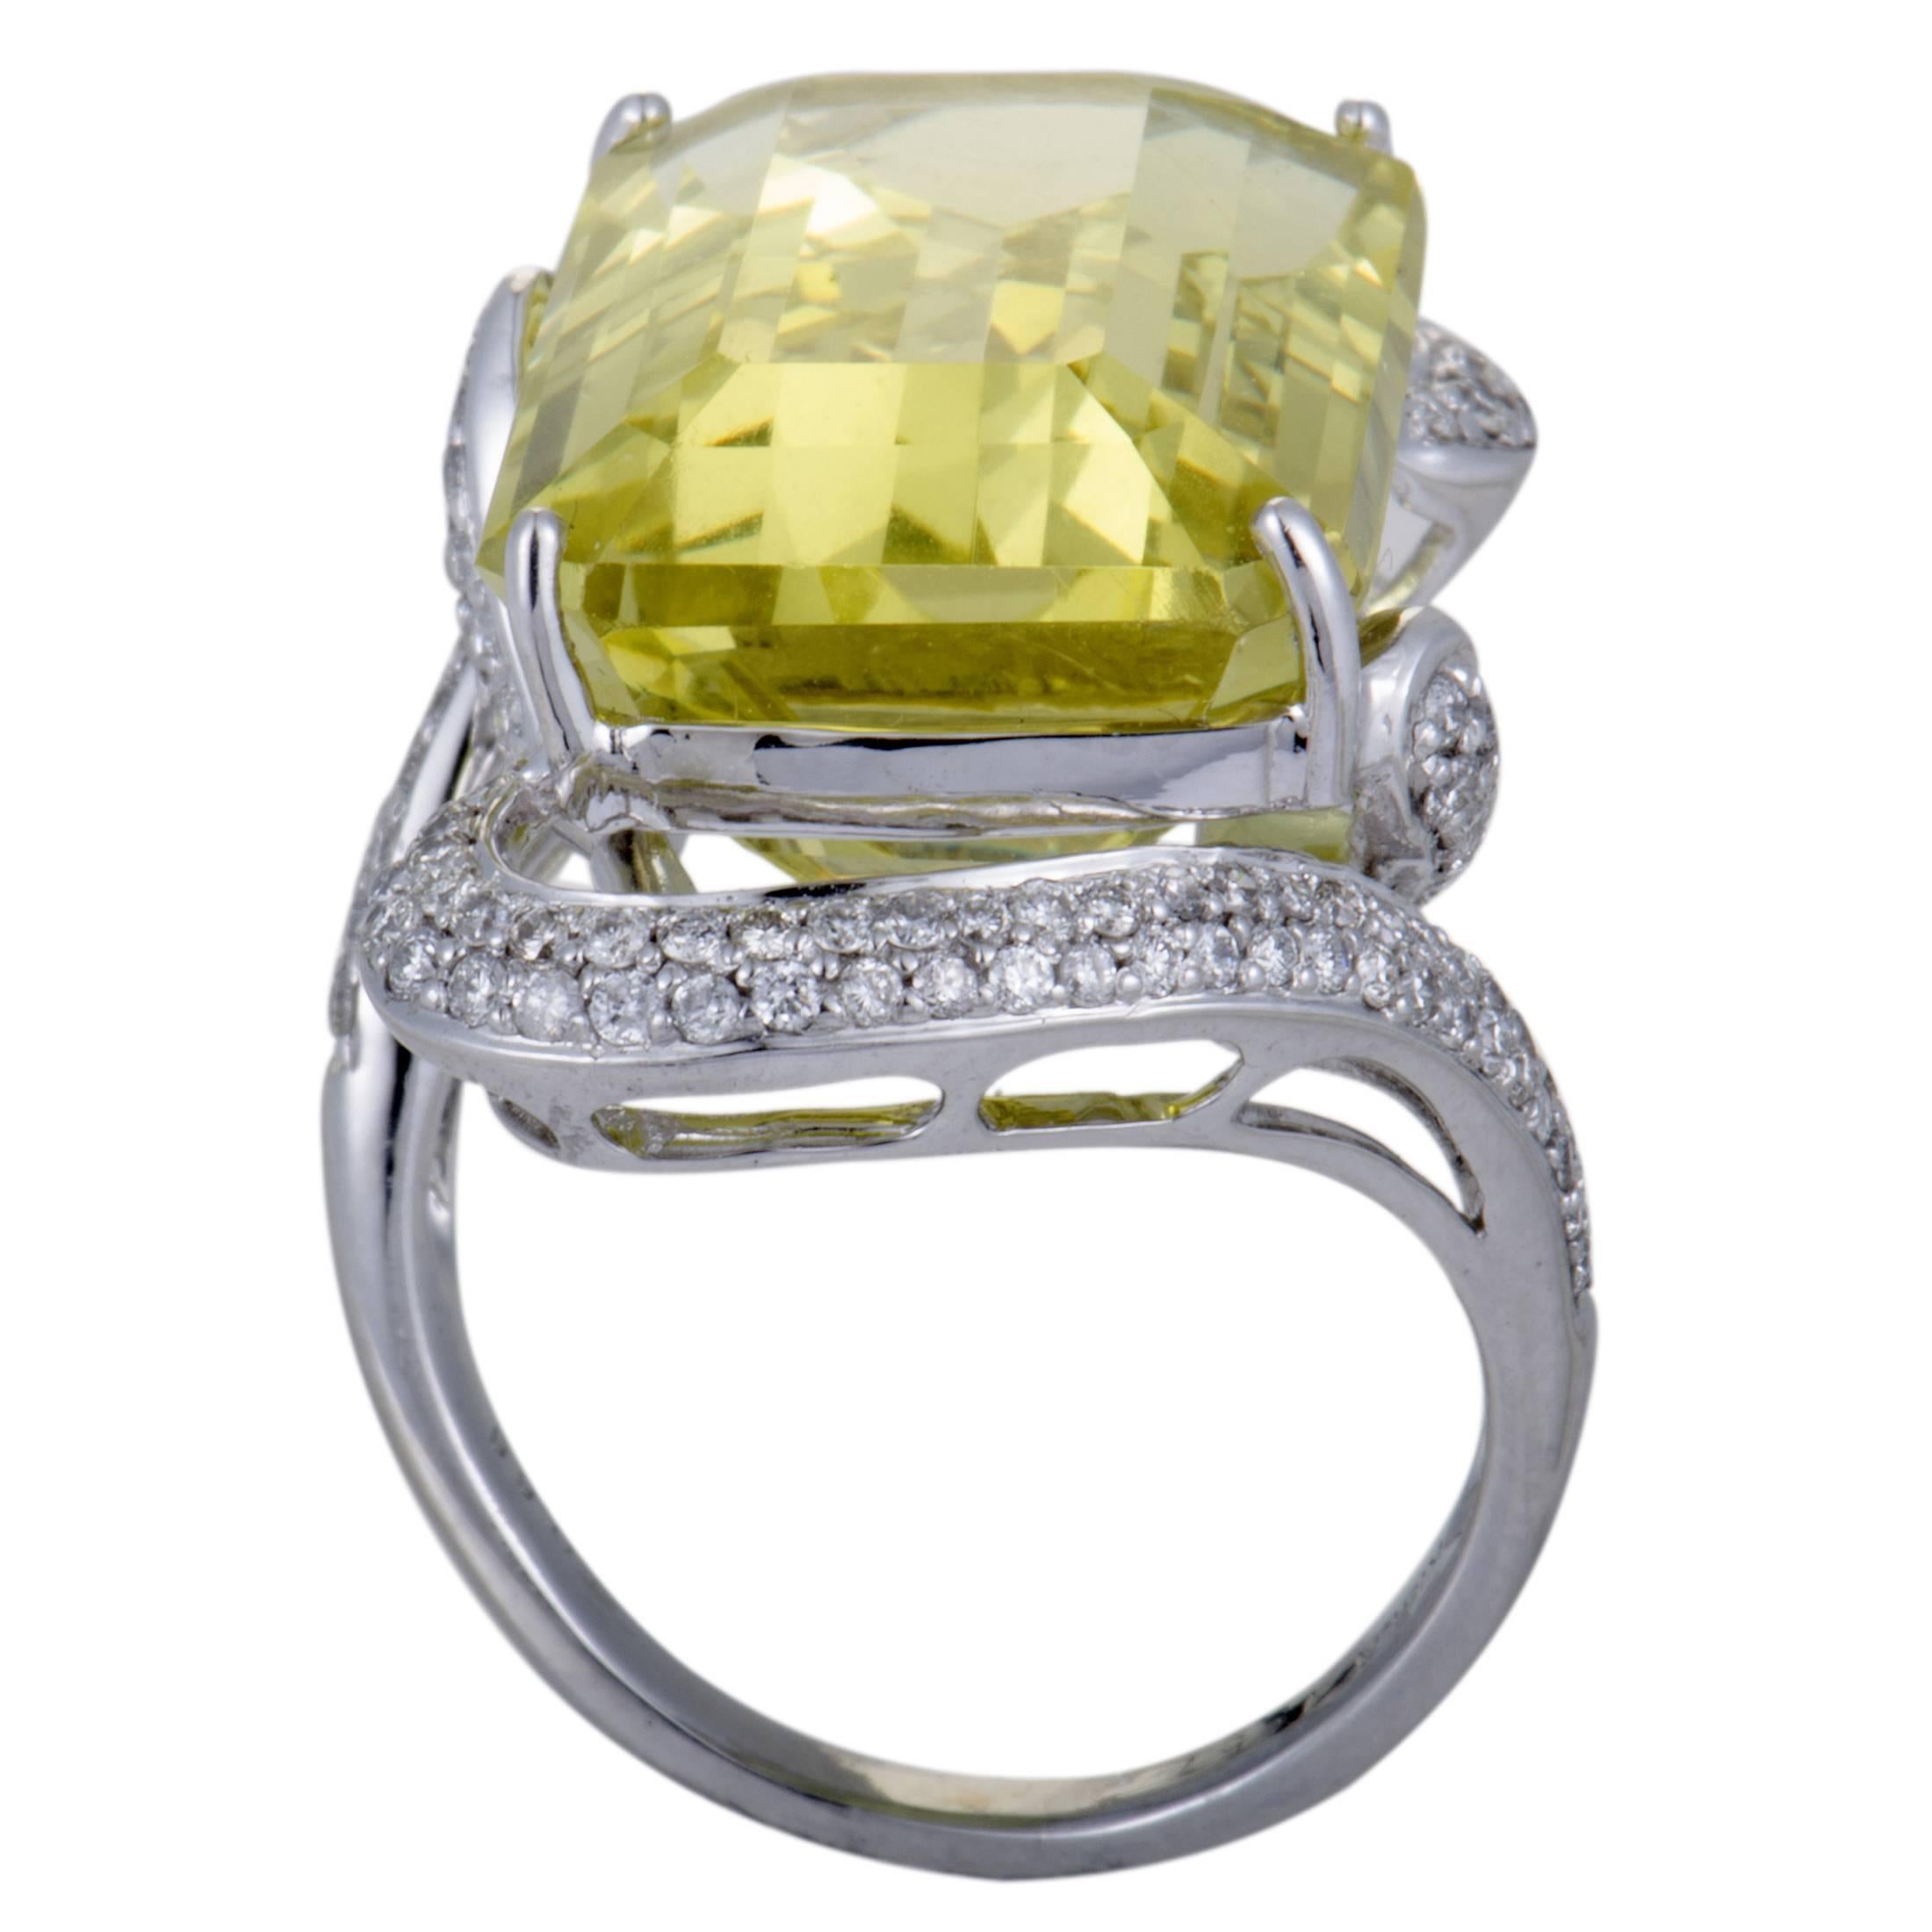 The alluring lemon citrine and the scintillating diamonds in combination with elegant 18K white gold give a splendidly harmonious appearance to this stunning cocktail ring. The citrine weighs 19.57 carats and the diamonds total 0.66 carats.
Ring Top